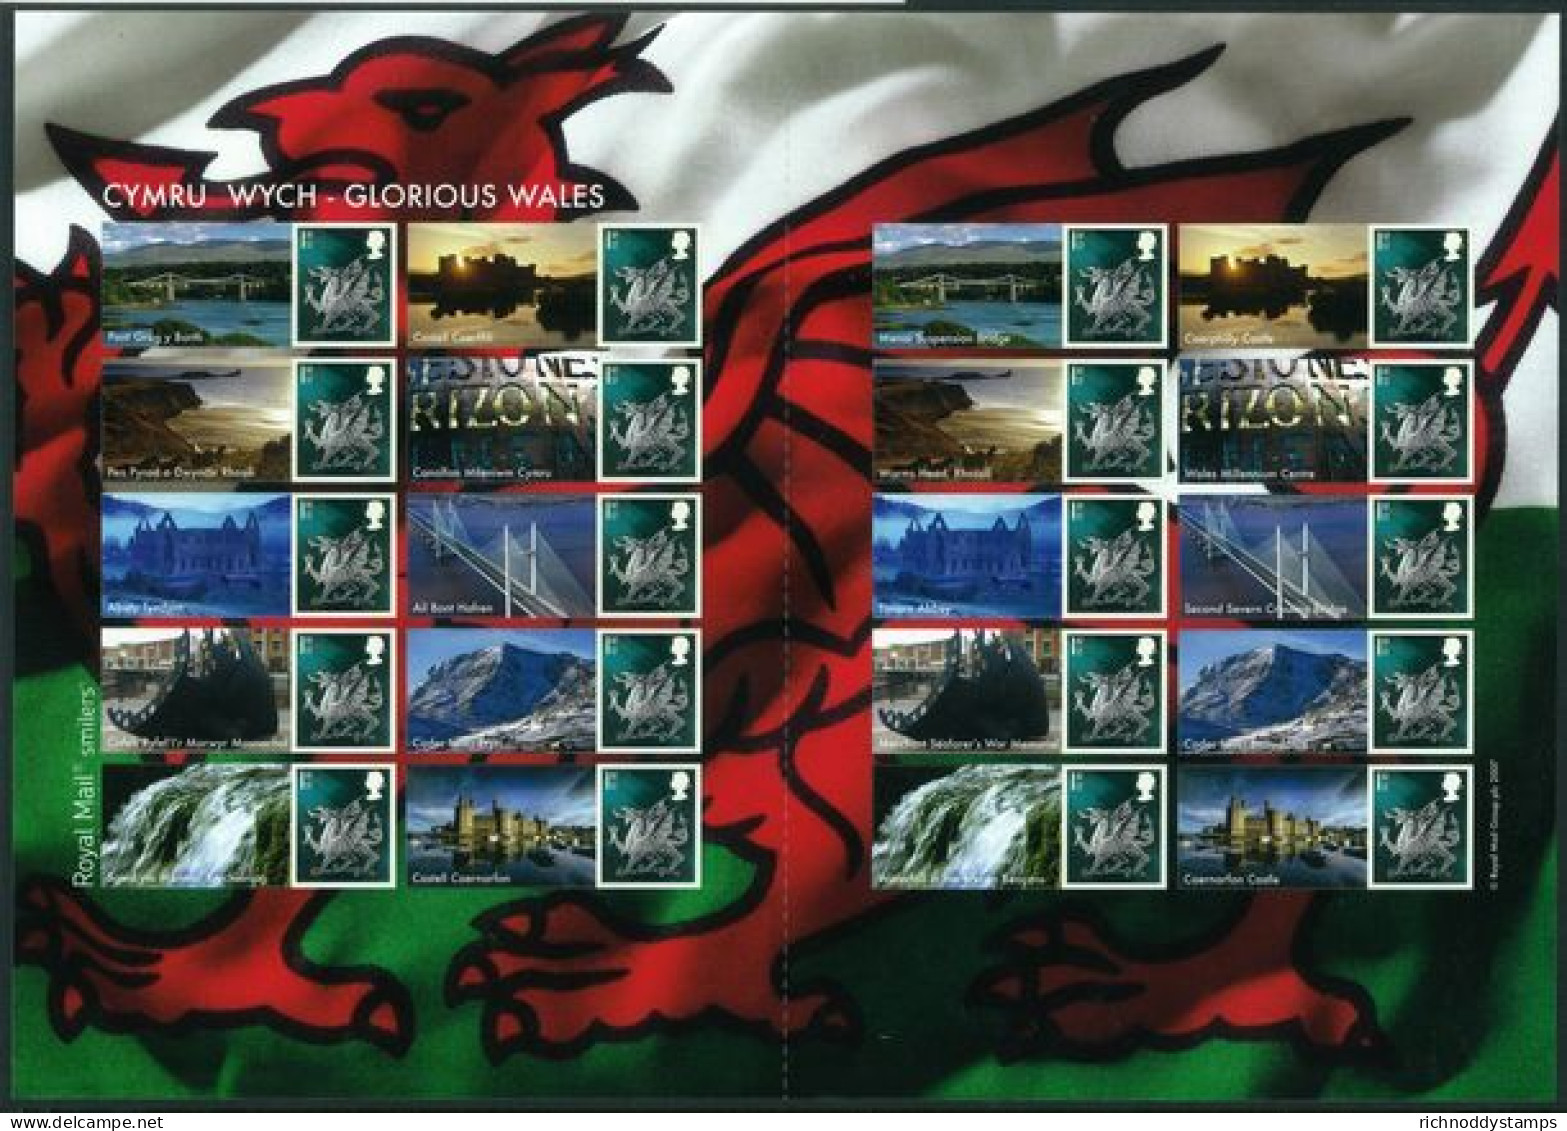 2007 Glorious Wales Smilers Sheet Unmounted Mint.  - Smilers Sheets